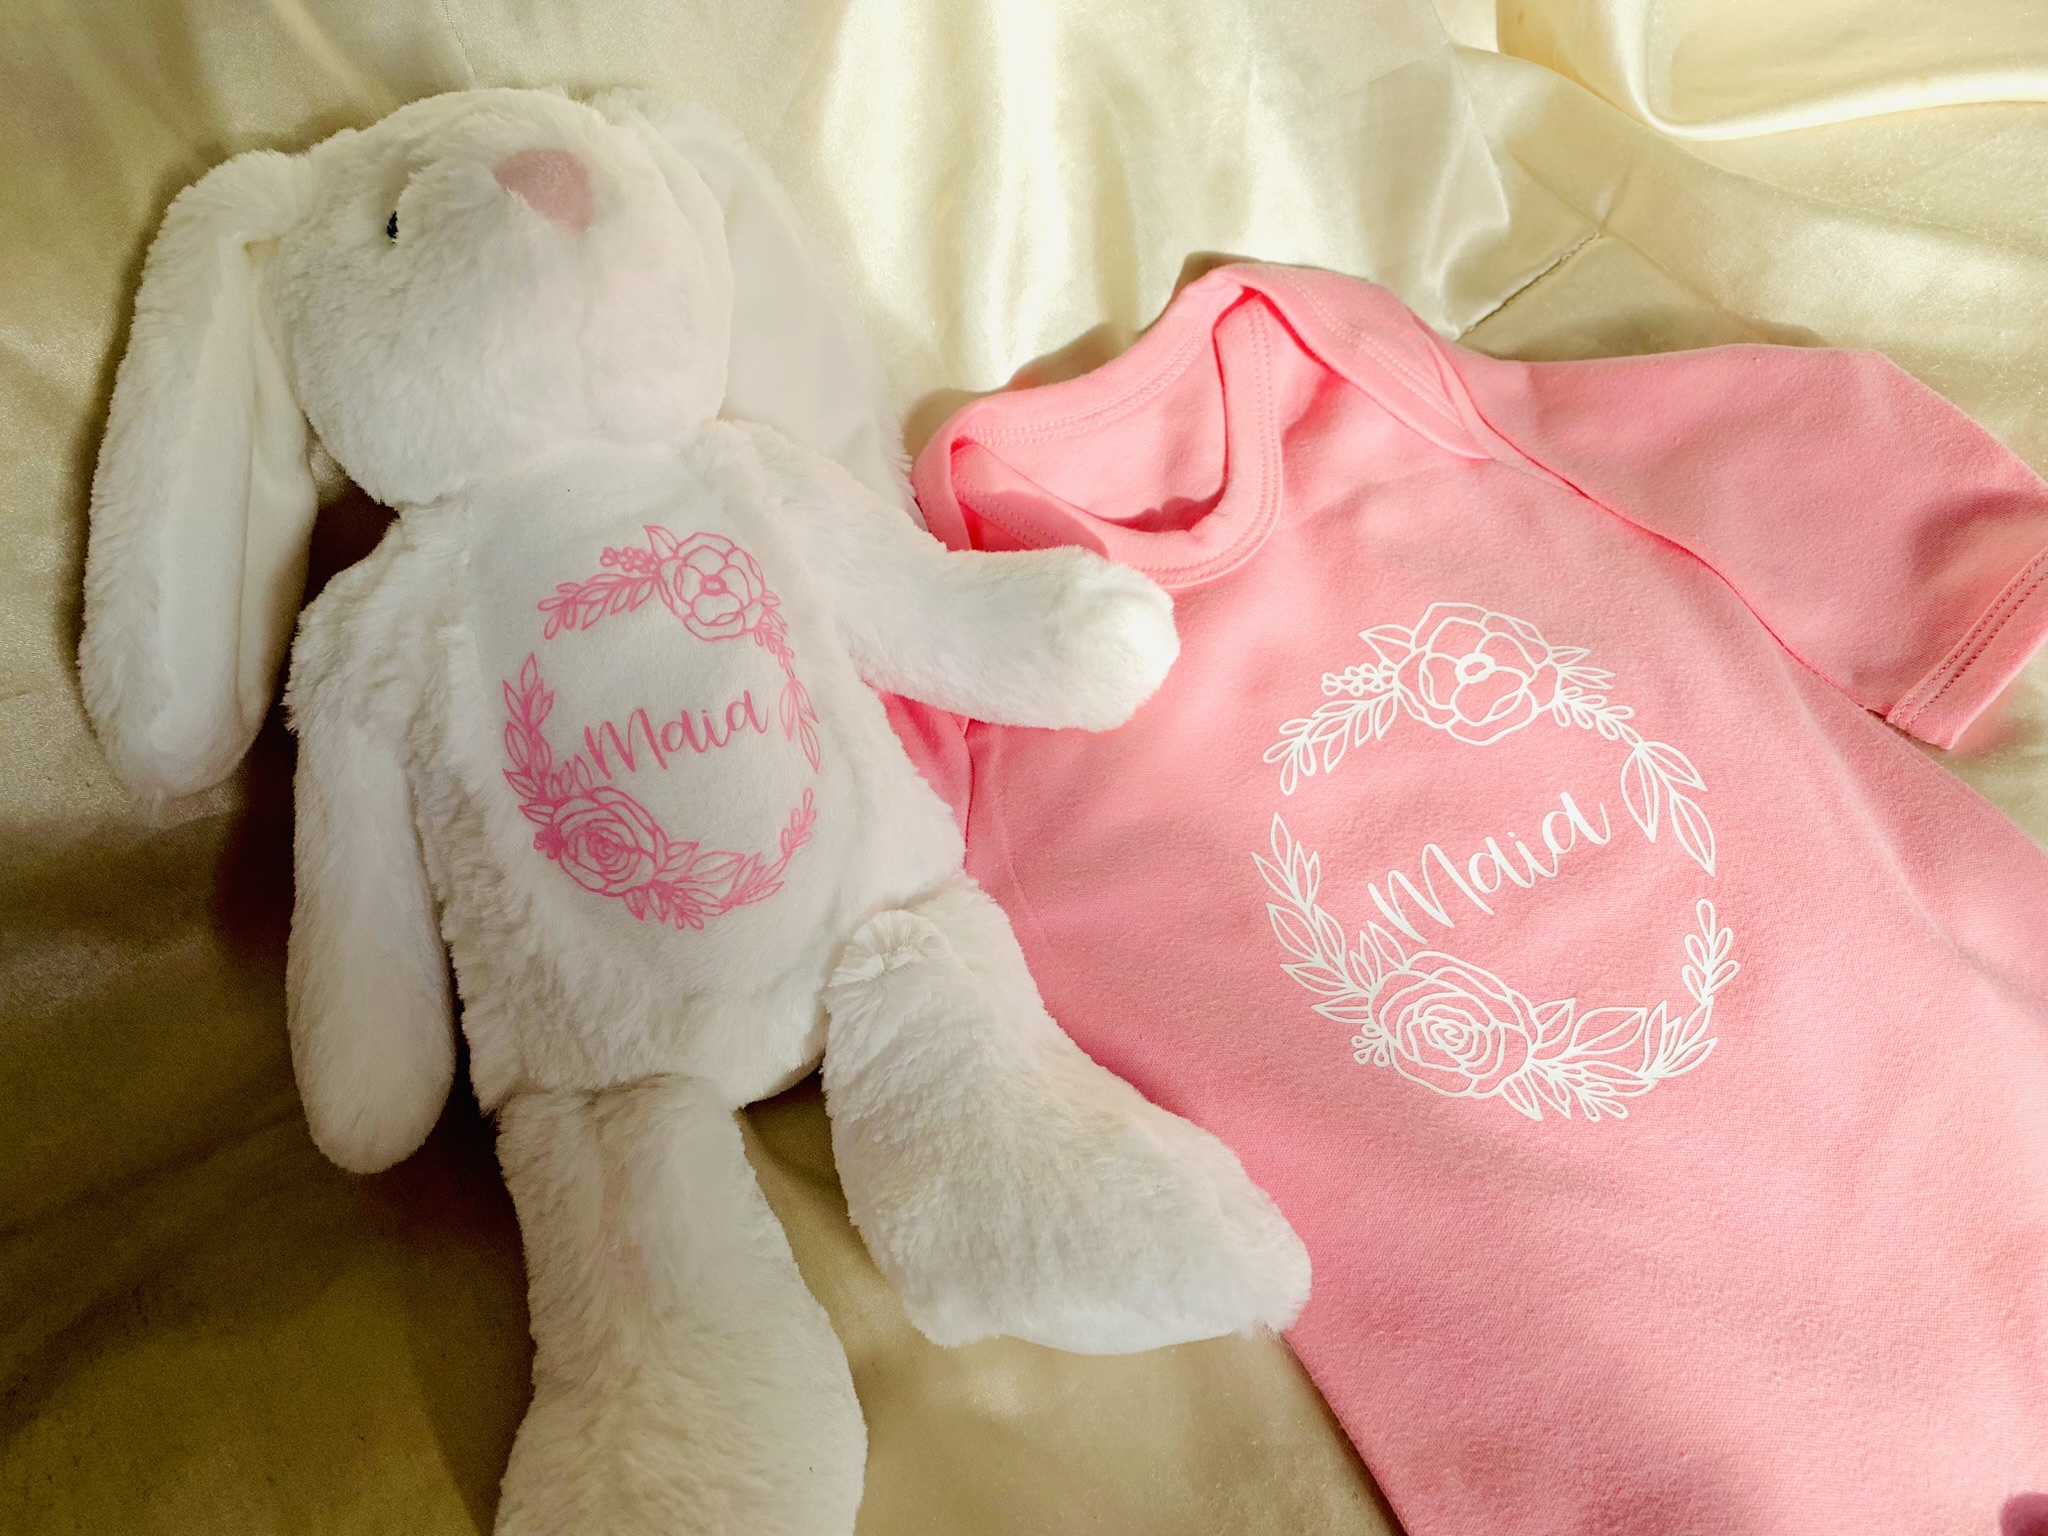 Personalised teddies and baby clothes